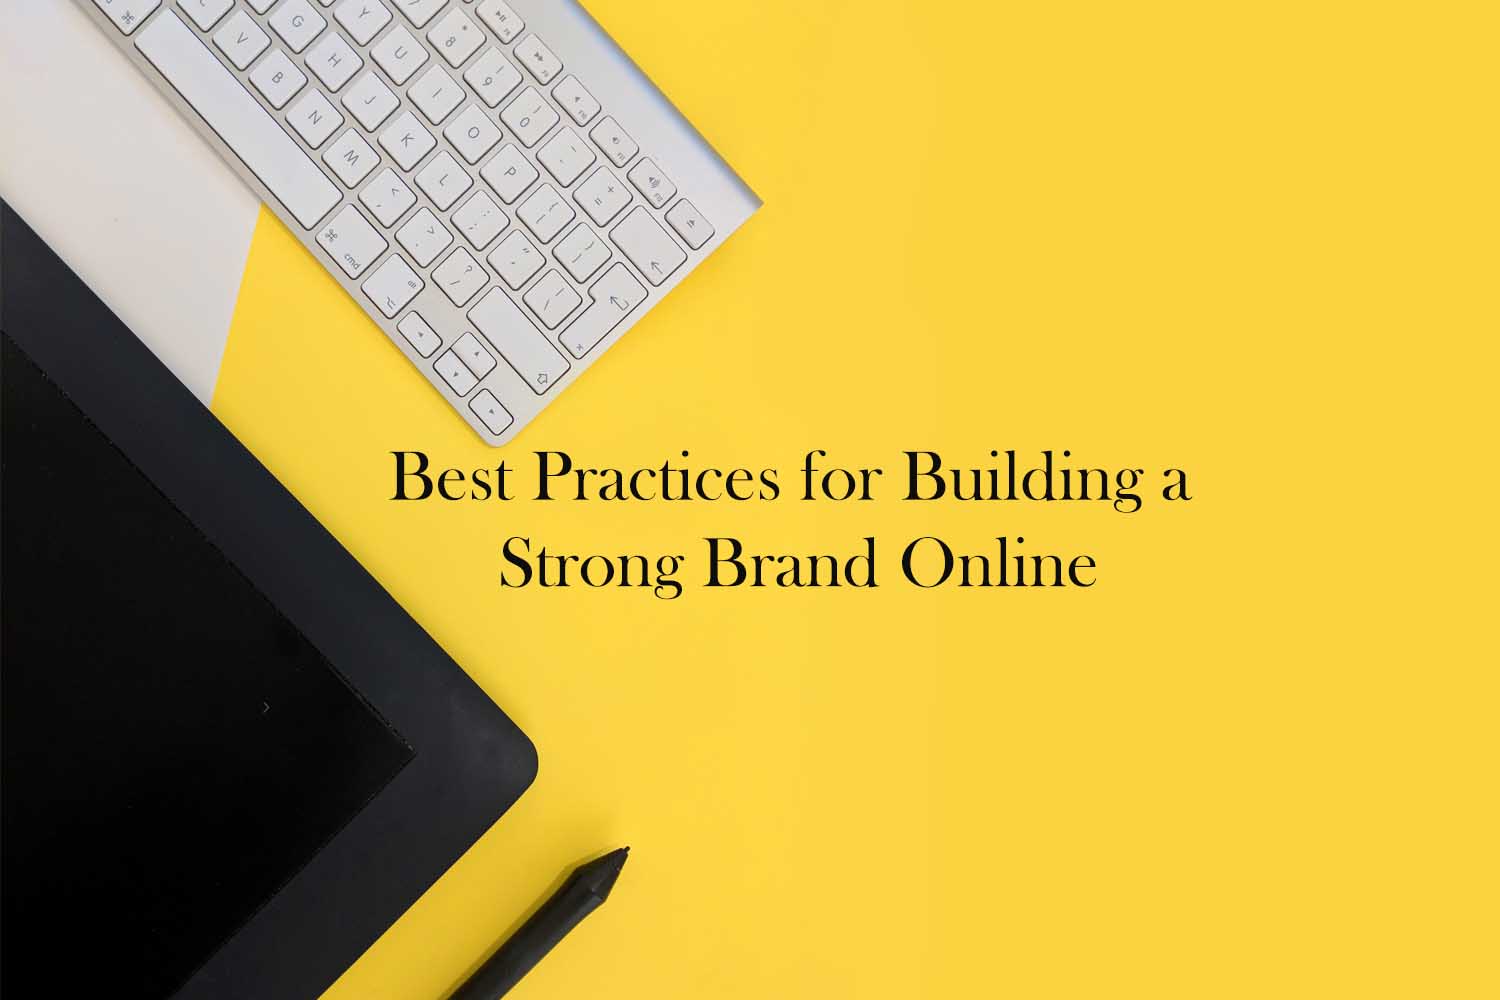 Best Practices for Building a Strong Brand Online